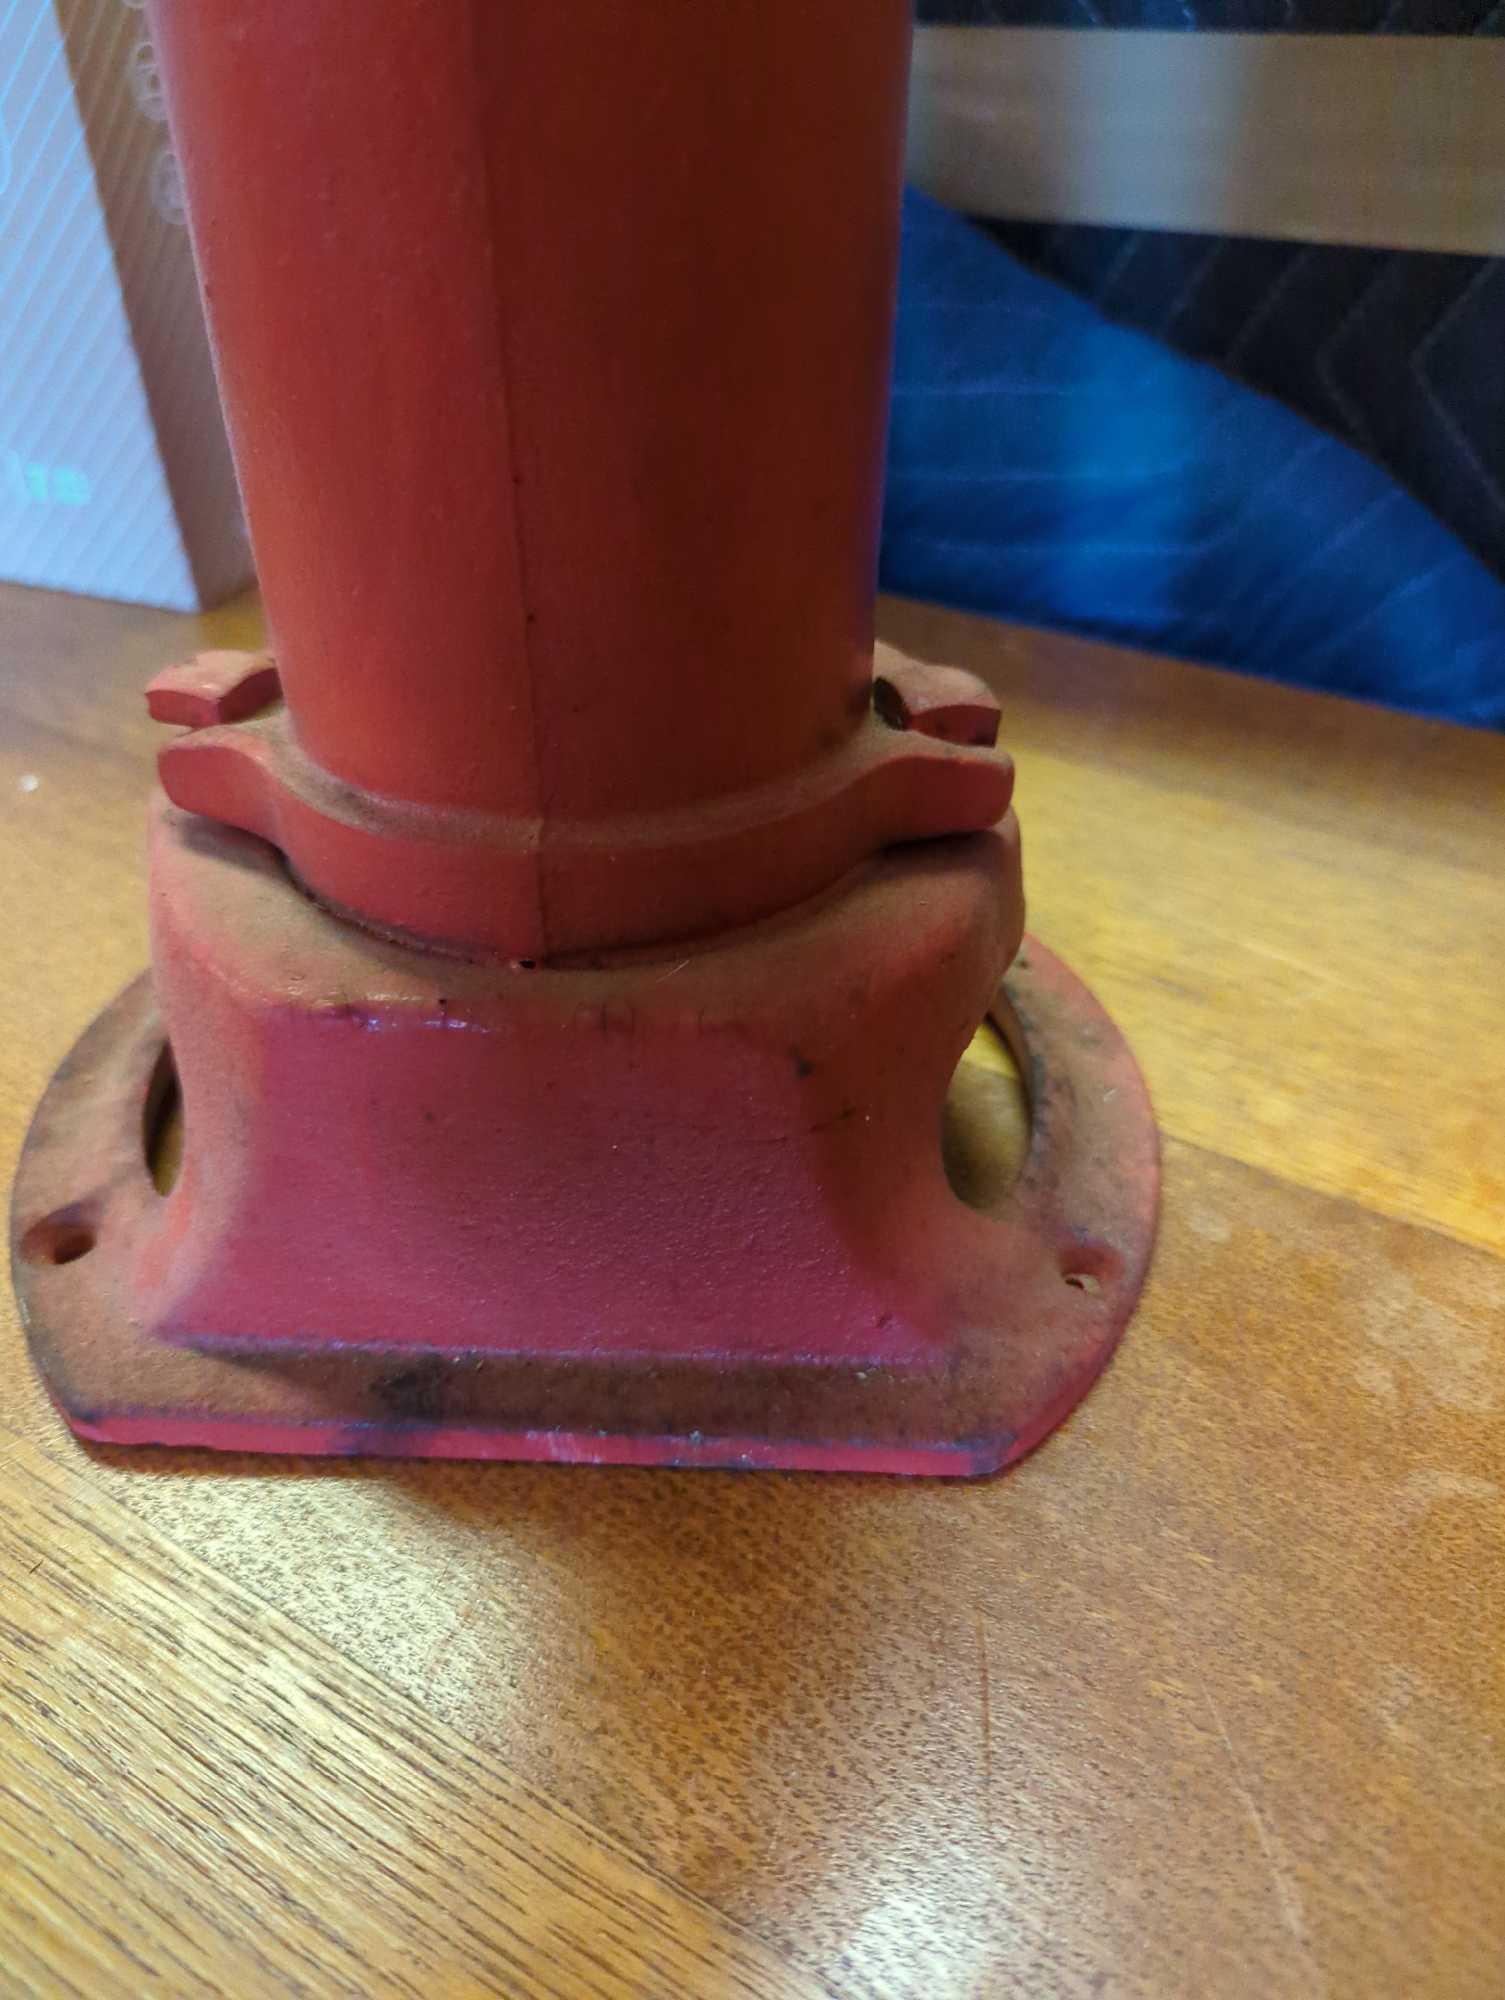 Early Style Pitcher Pump, Has Some Rusting and Some Minor Scratches Measure Approximately 6.5 in x 9